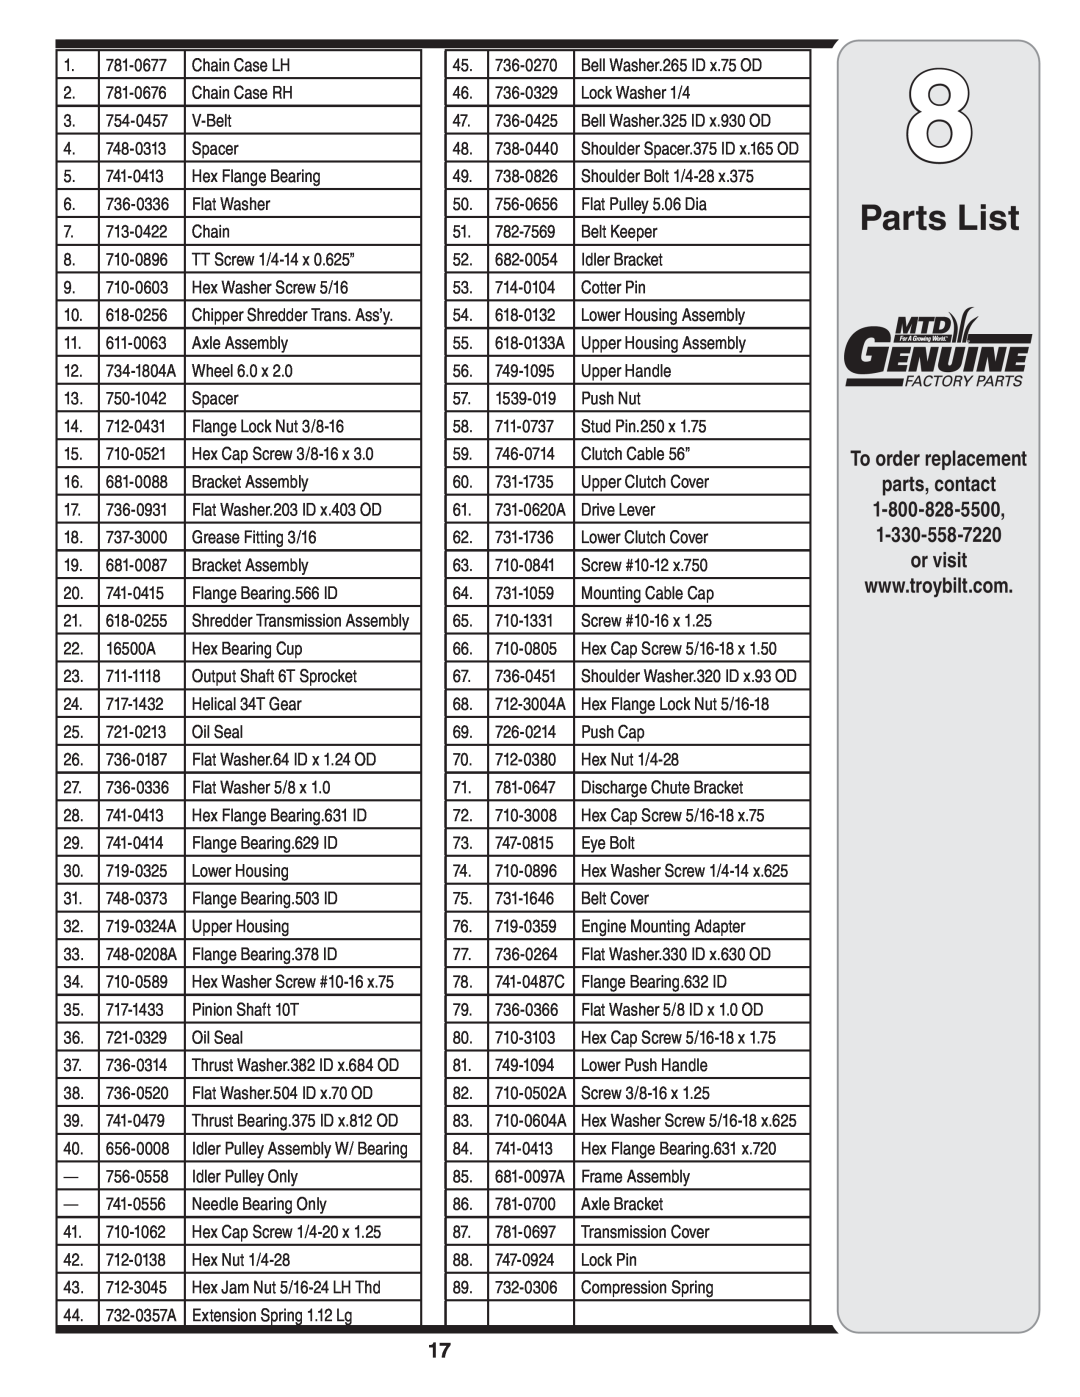 Troy-Bilt 204 warranty Parts List, To order replacement parts, contact, or visit, Chipper Shredder Trans. Ass’y 